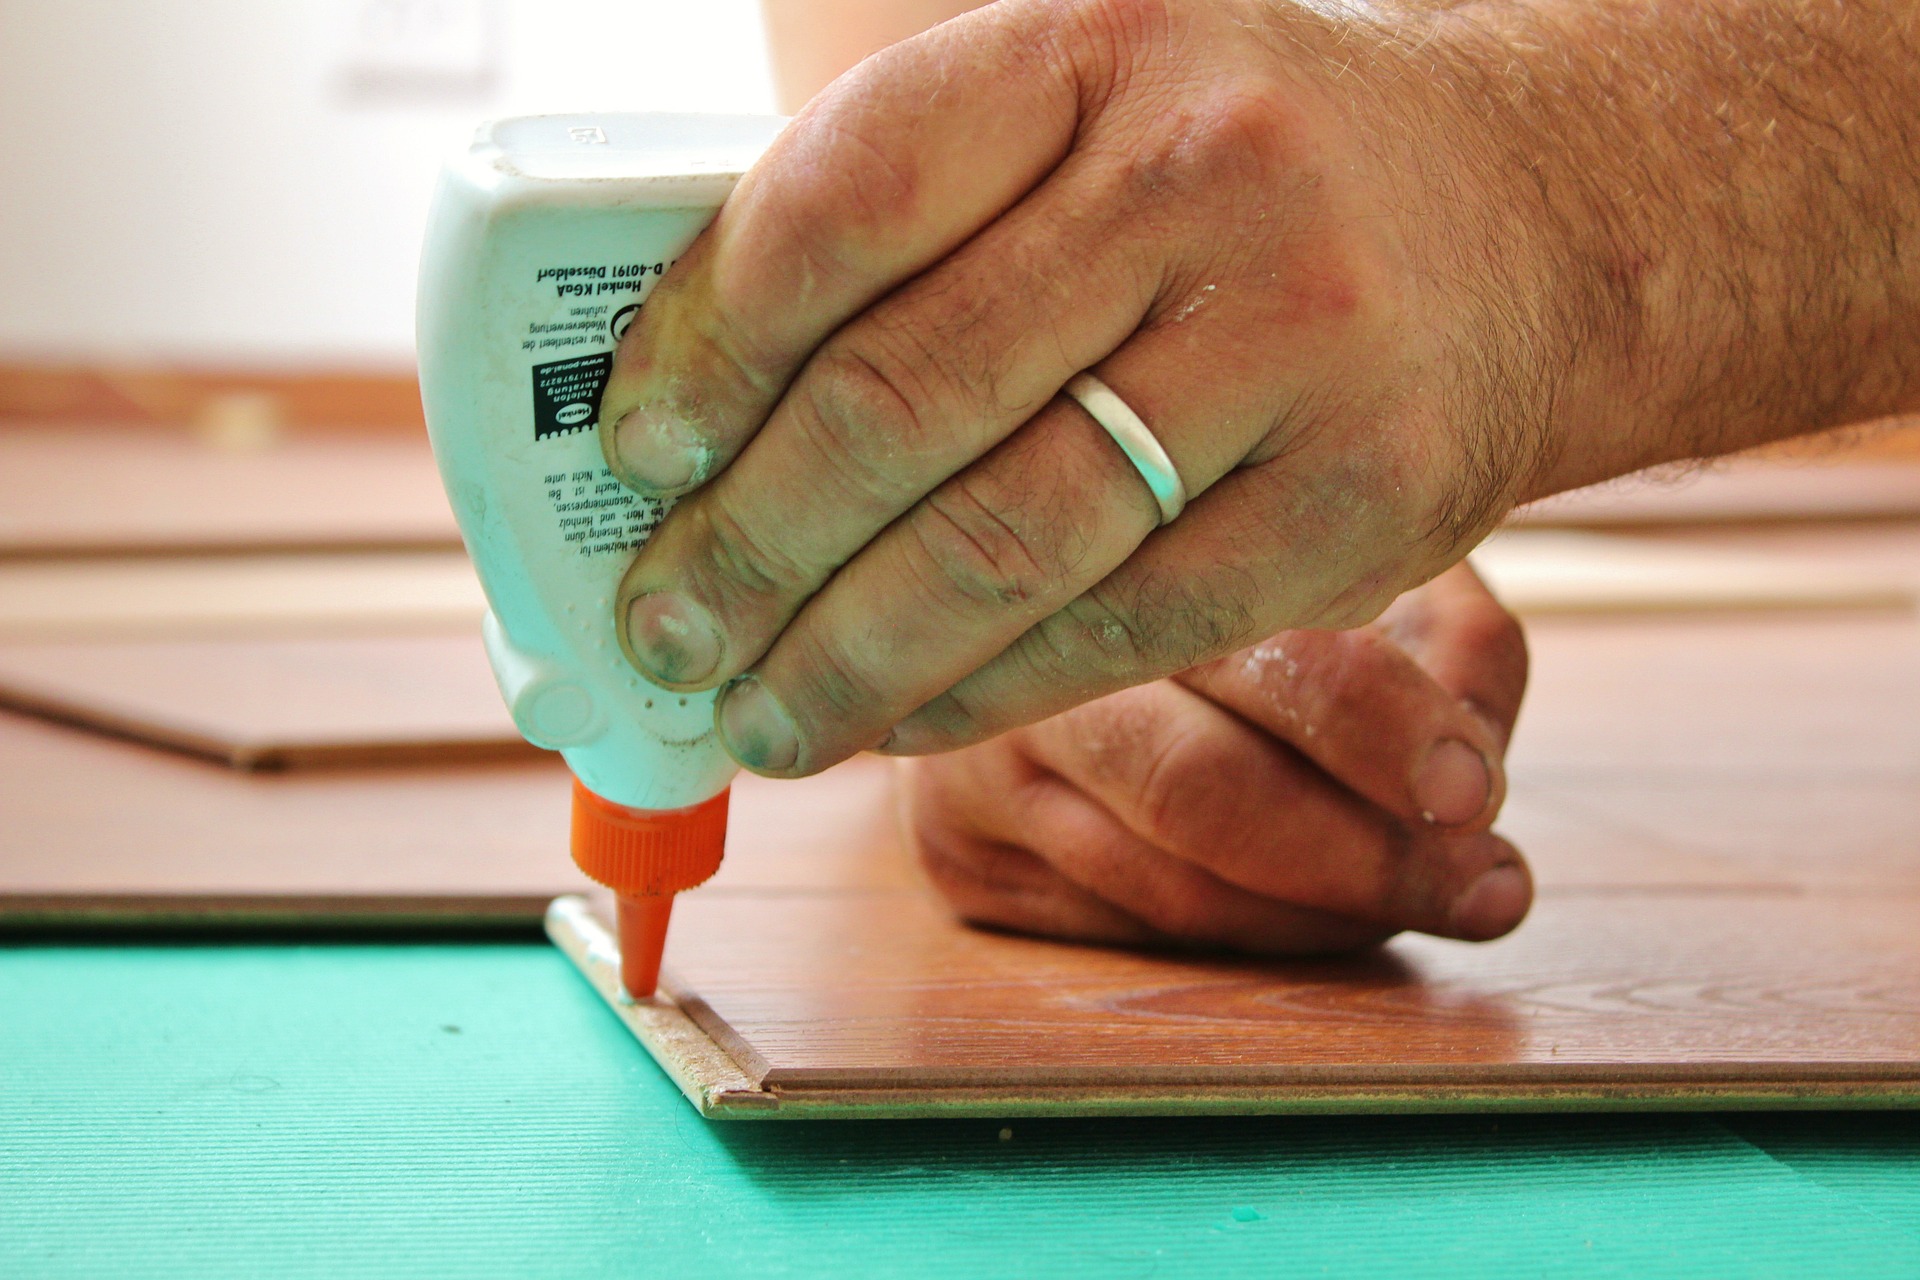 Wood Filler vs Wood Glue: Which Is Suitable for Your Application?